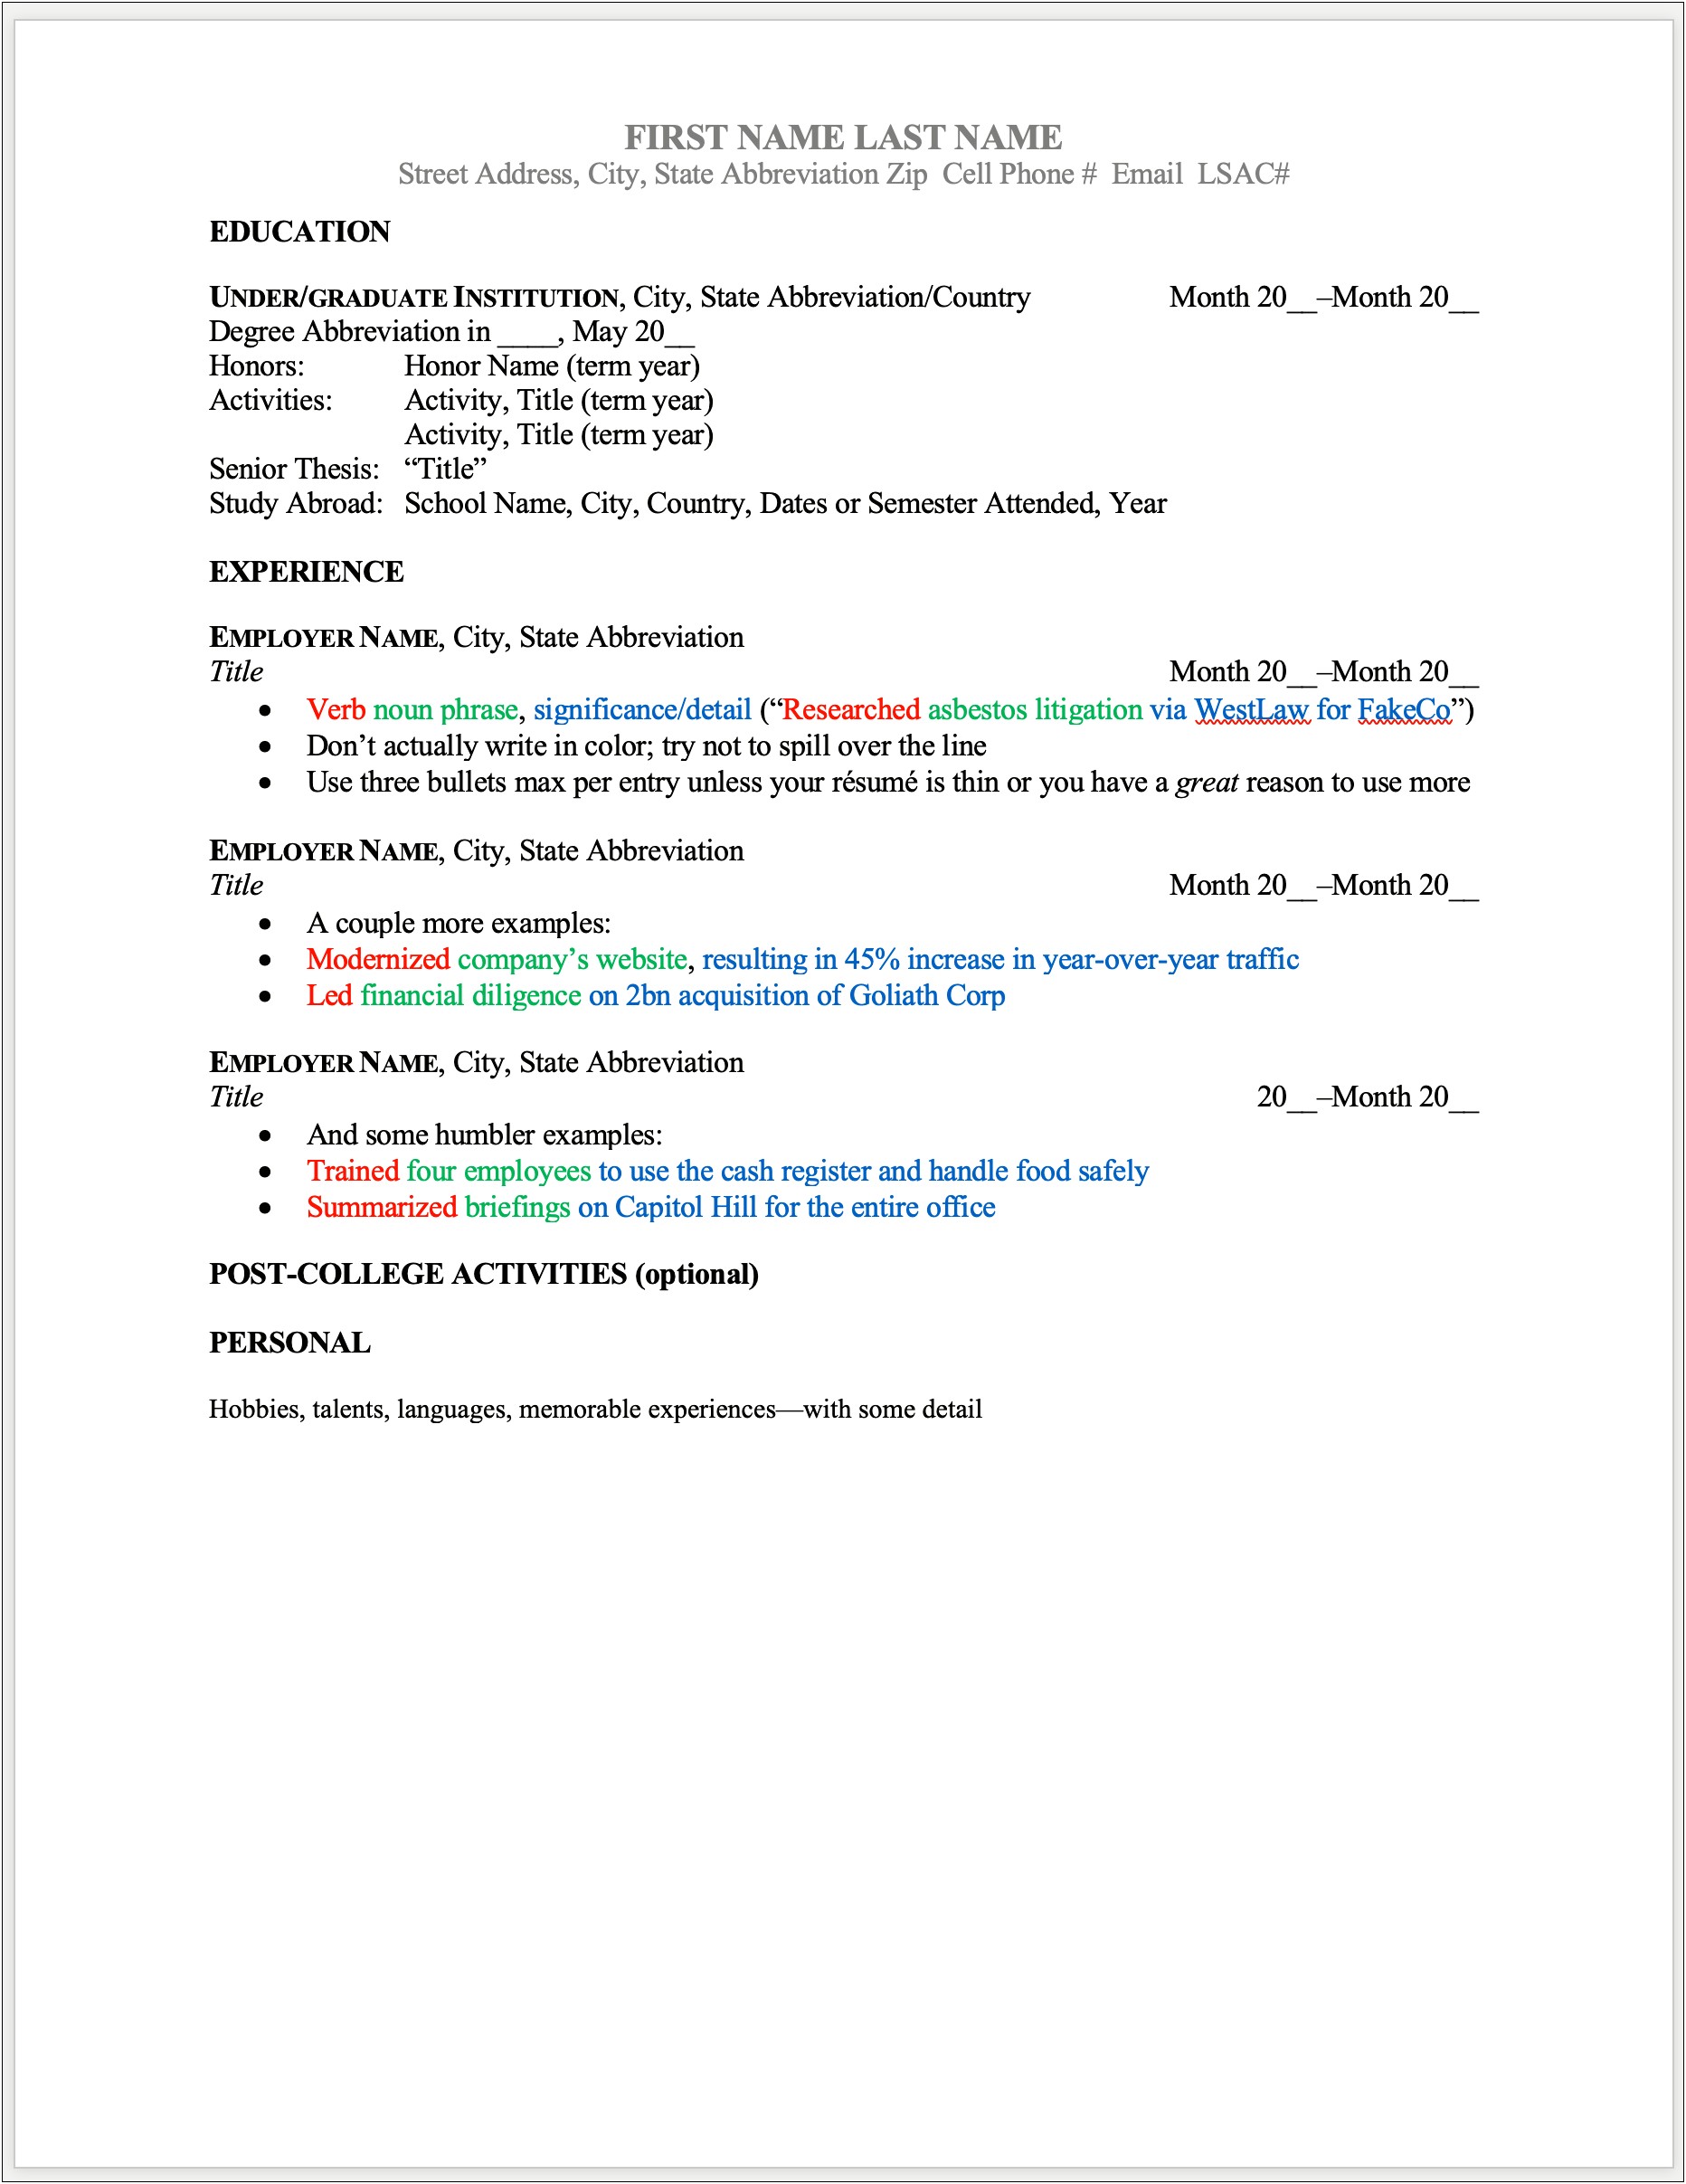 Grad School Resume One Or Two Pages